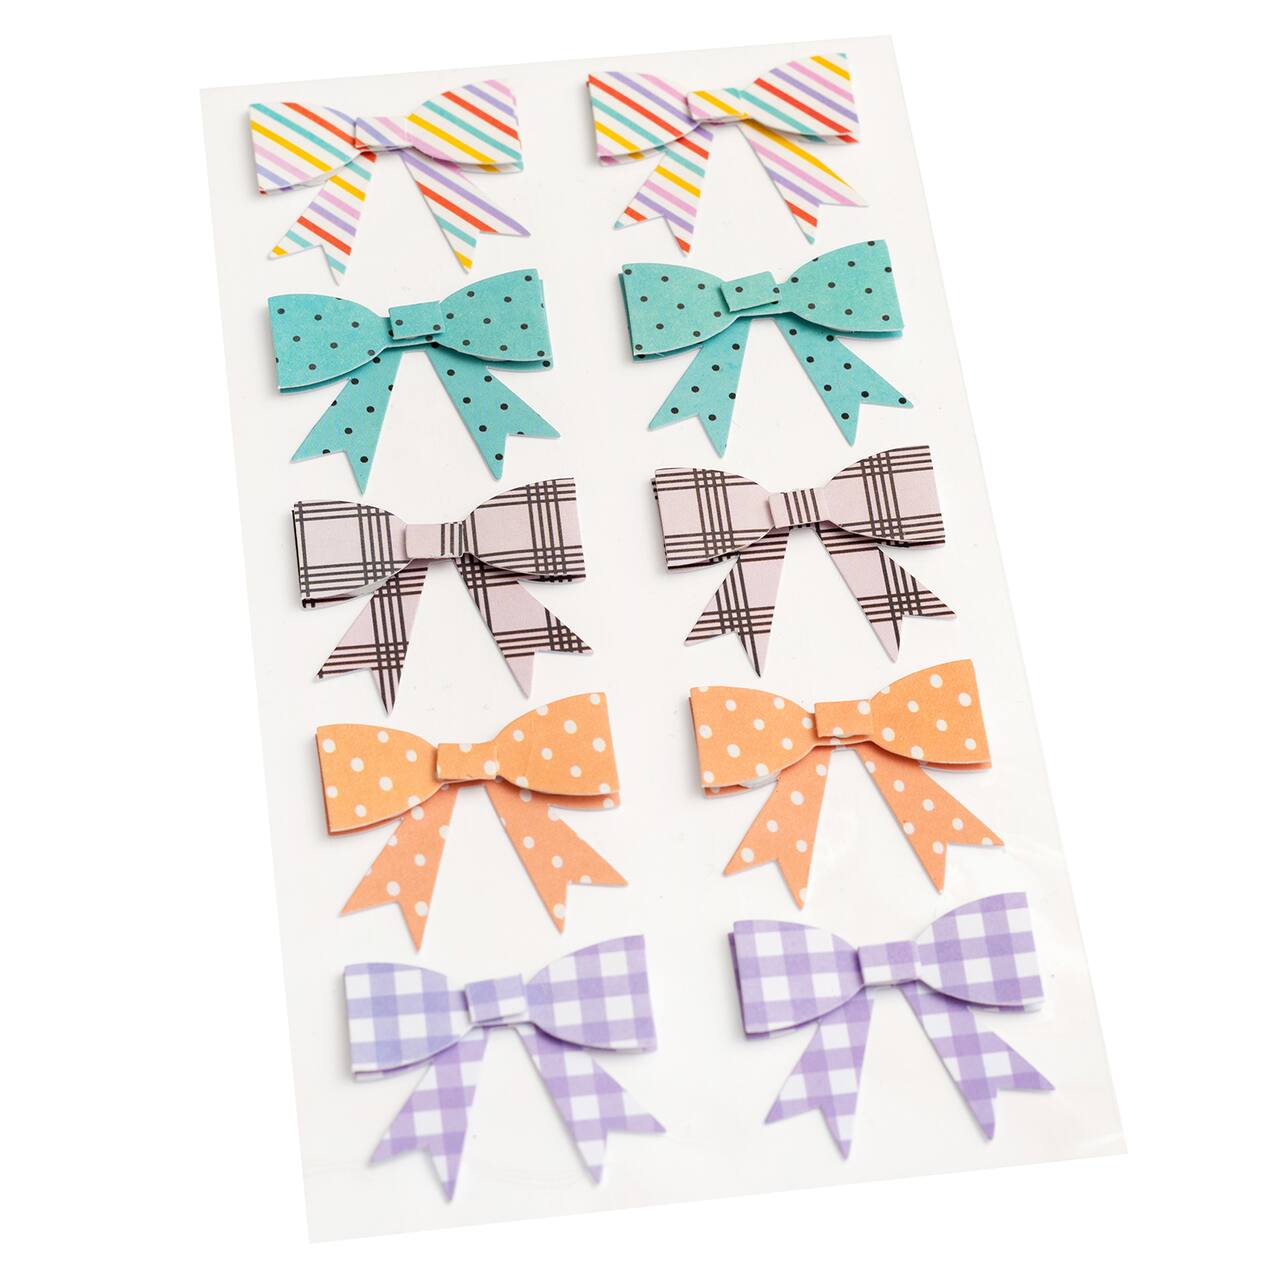 12 Packs: 10 ct. (120 total) Bow Stickers by Recollections™